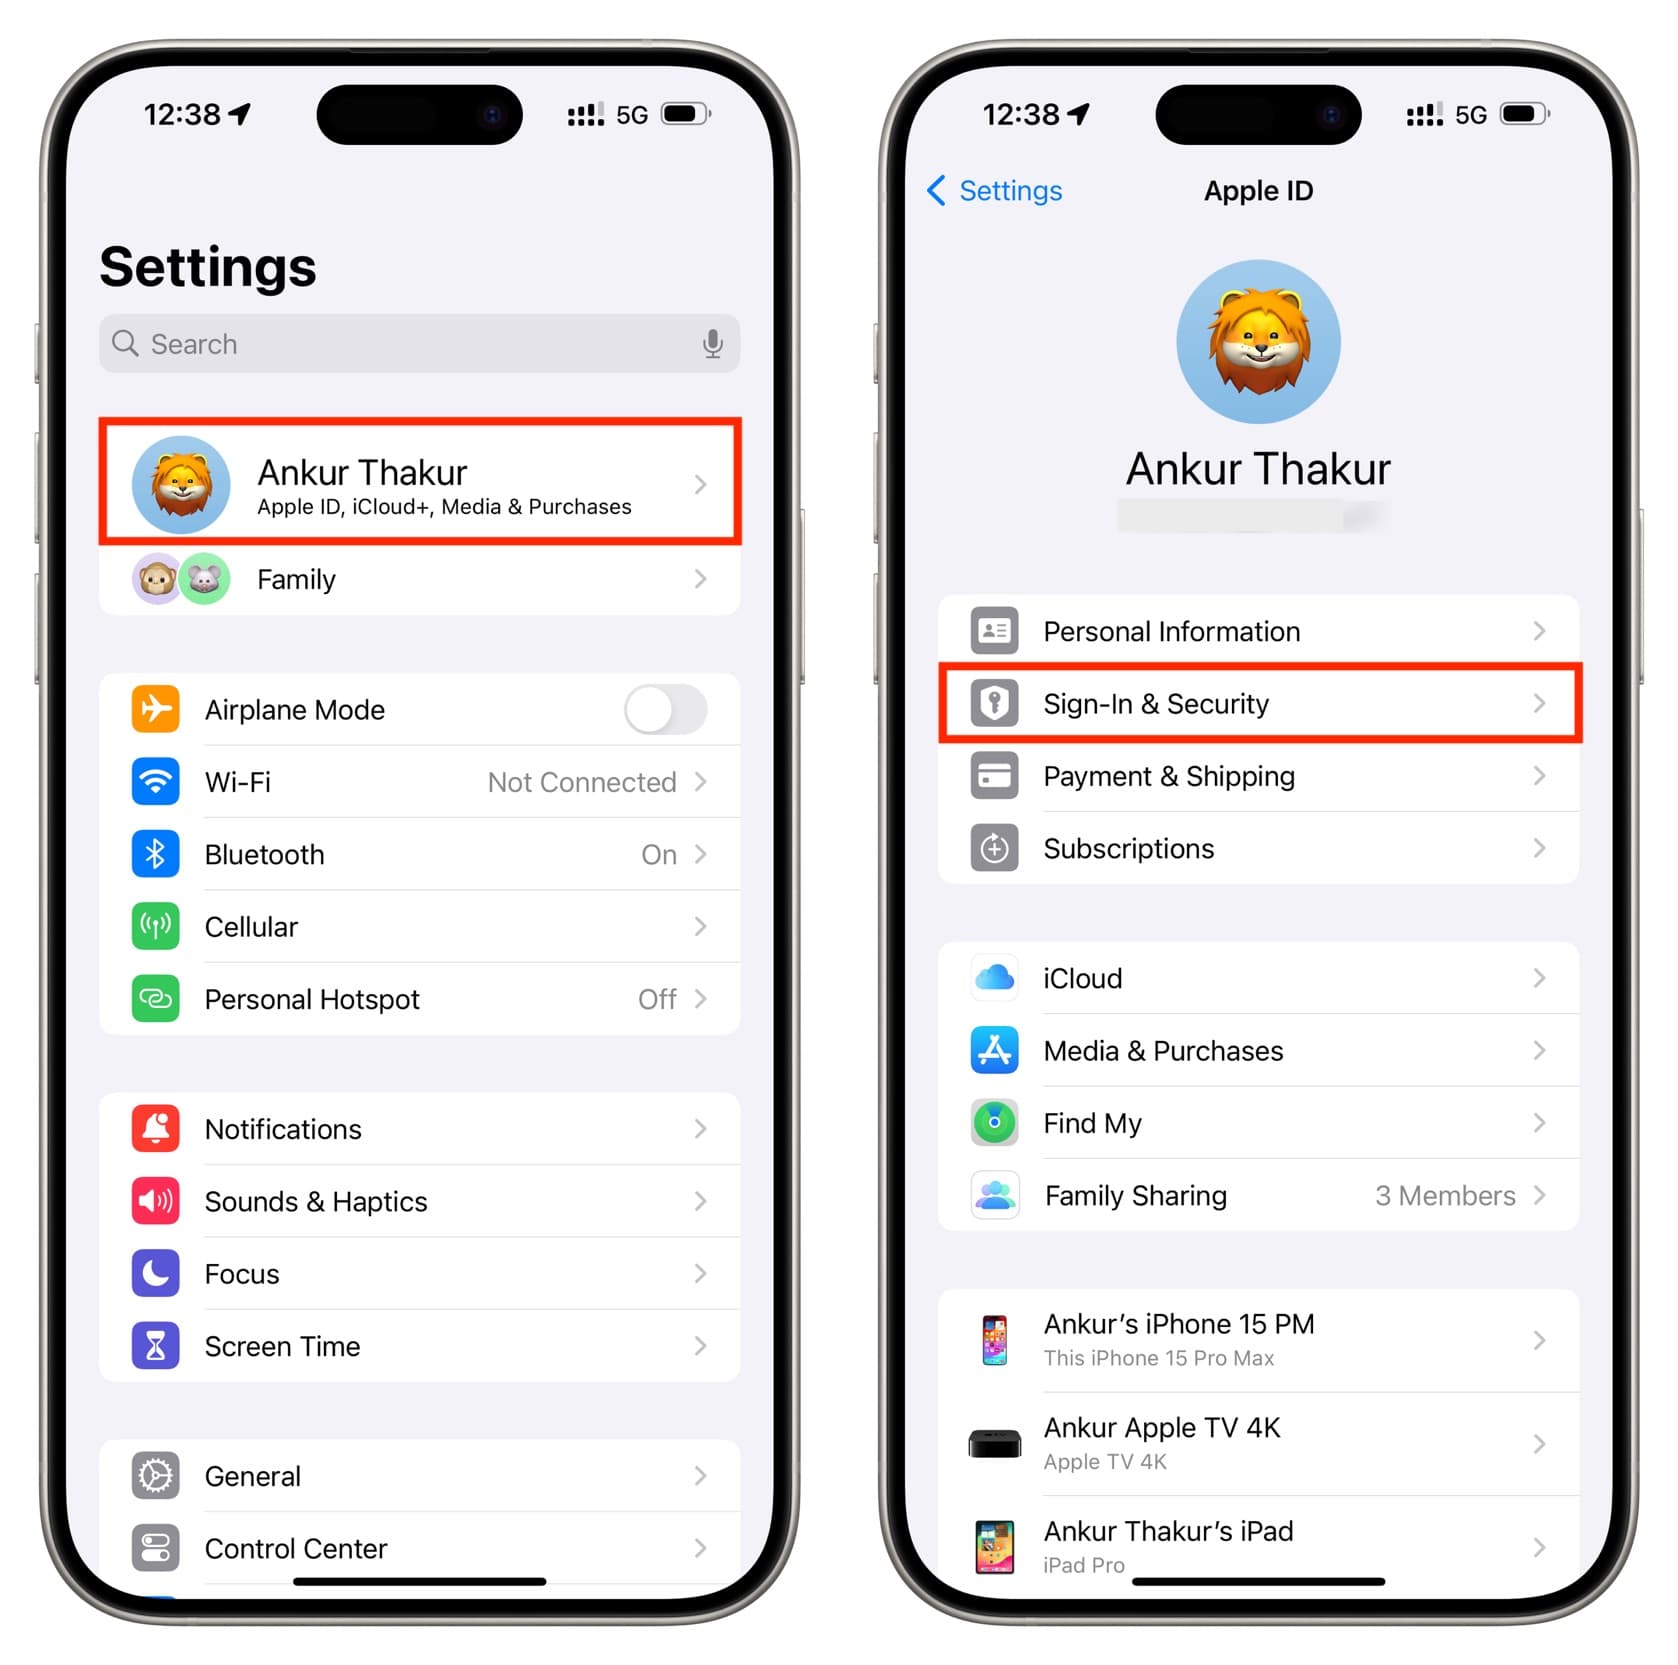 Tap your name and then tap Sign-In and Security in iPhone Settings